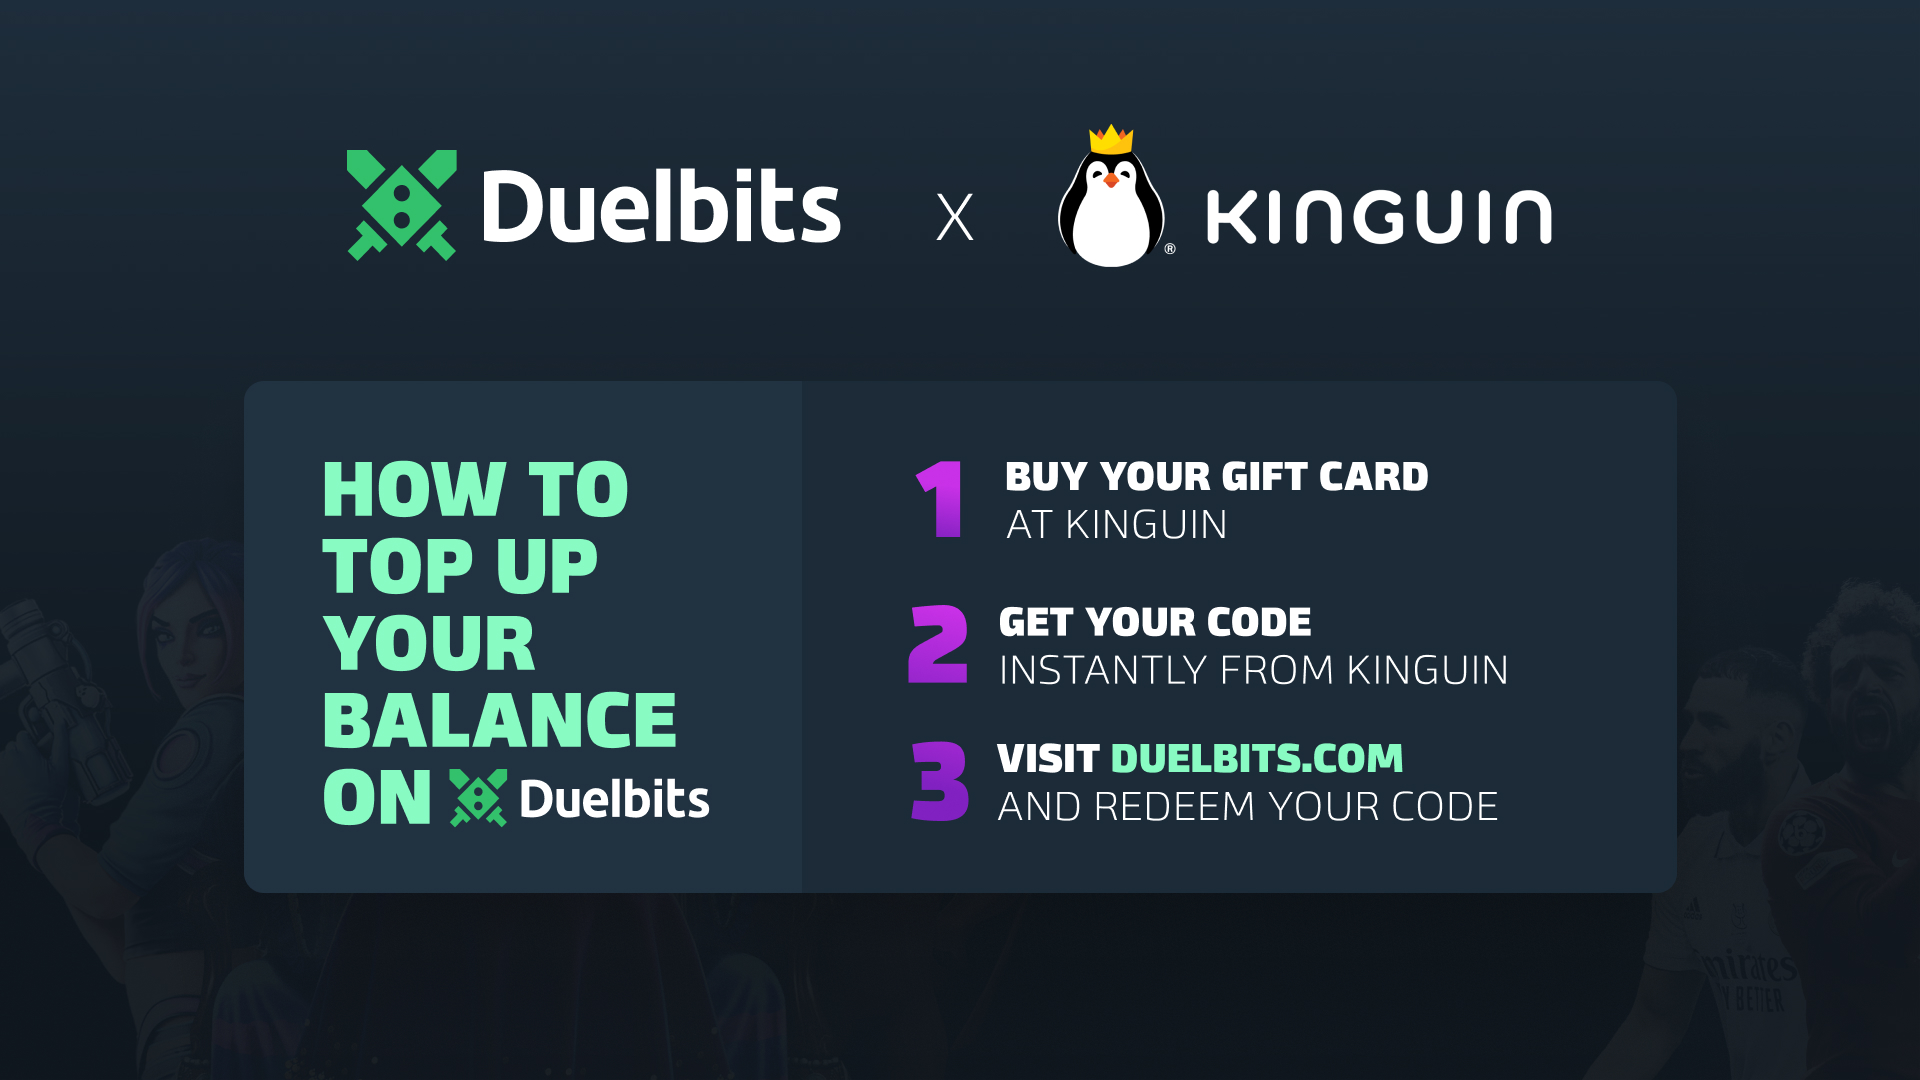 DuelBits $5 Gift Card, $6.27